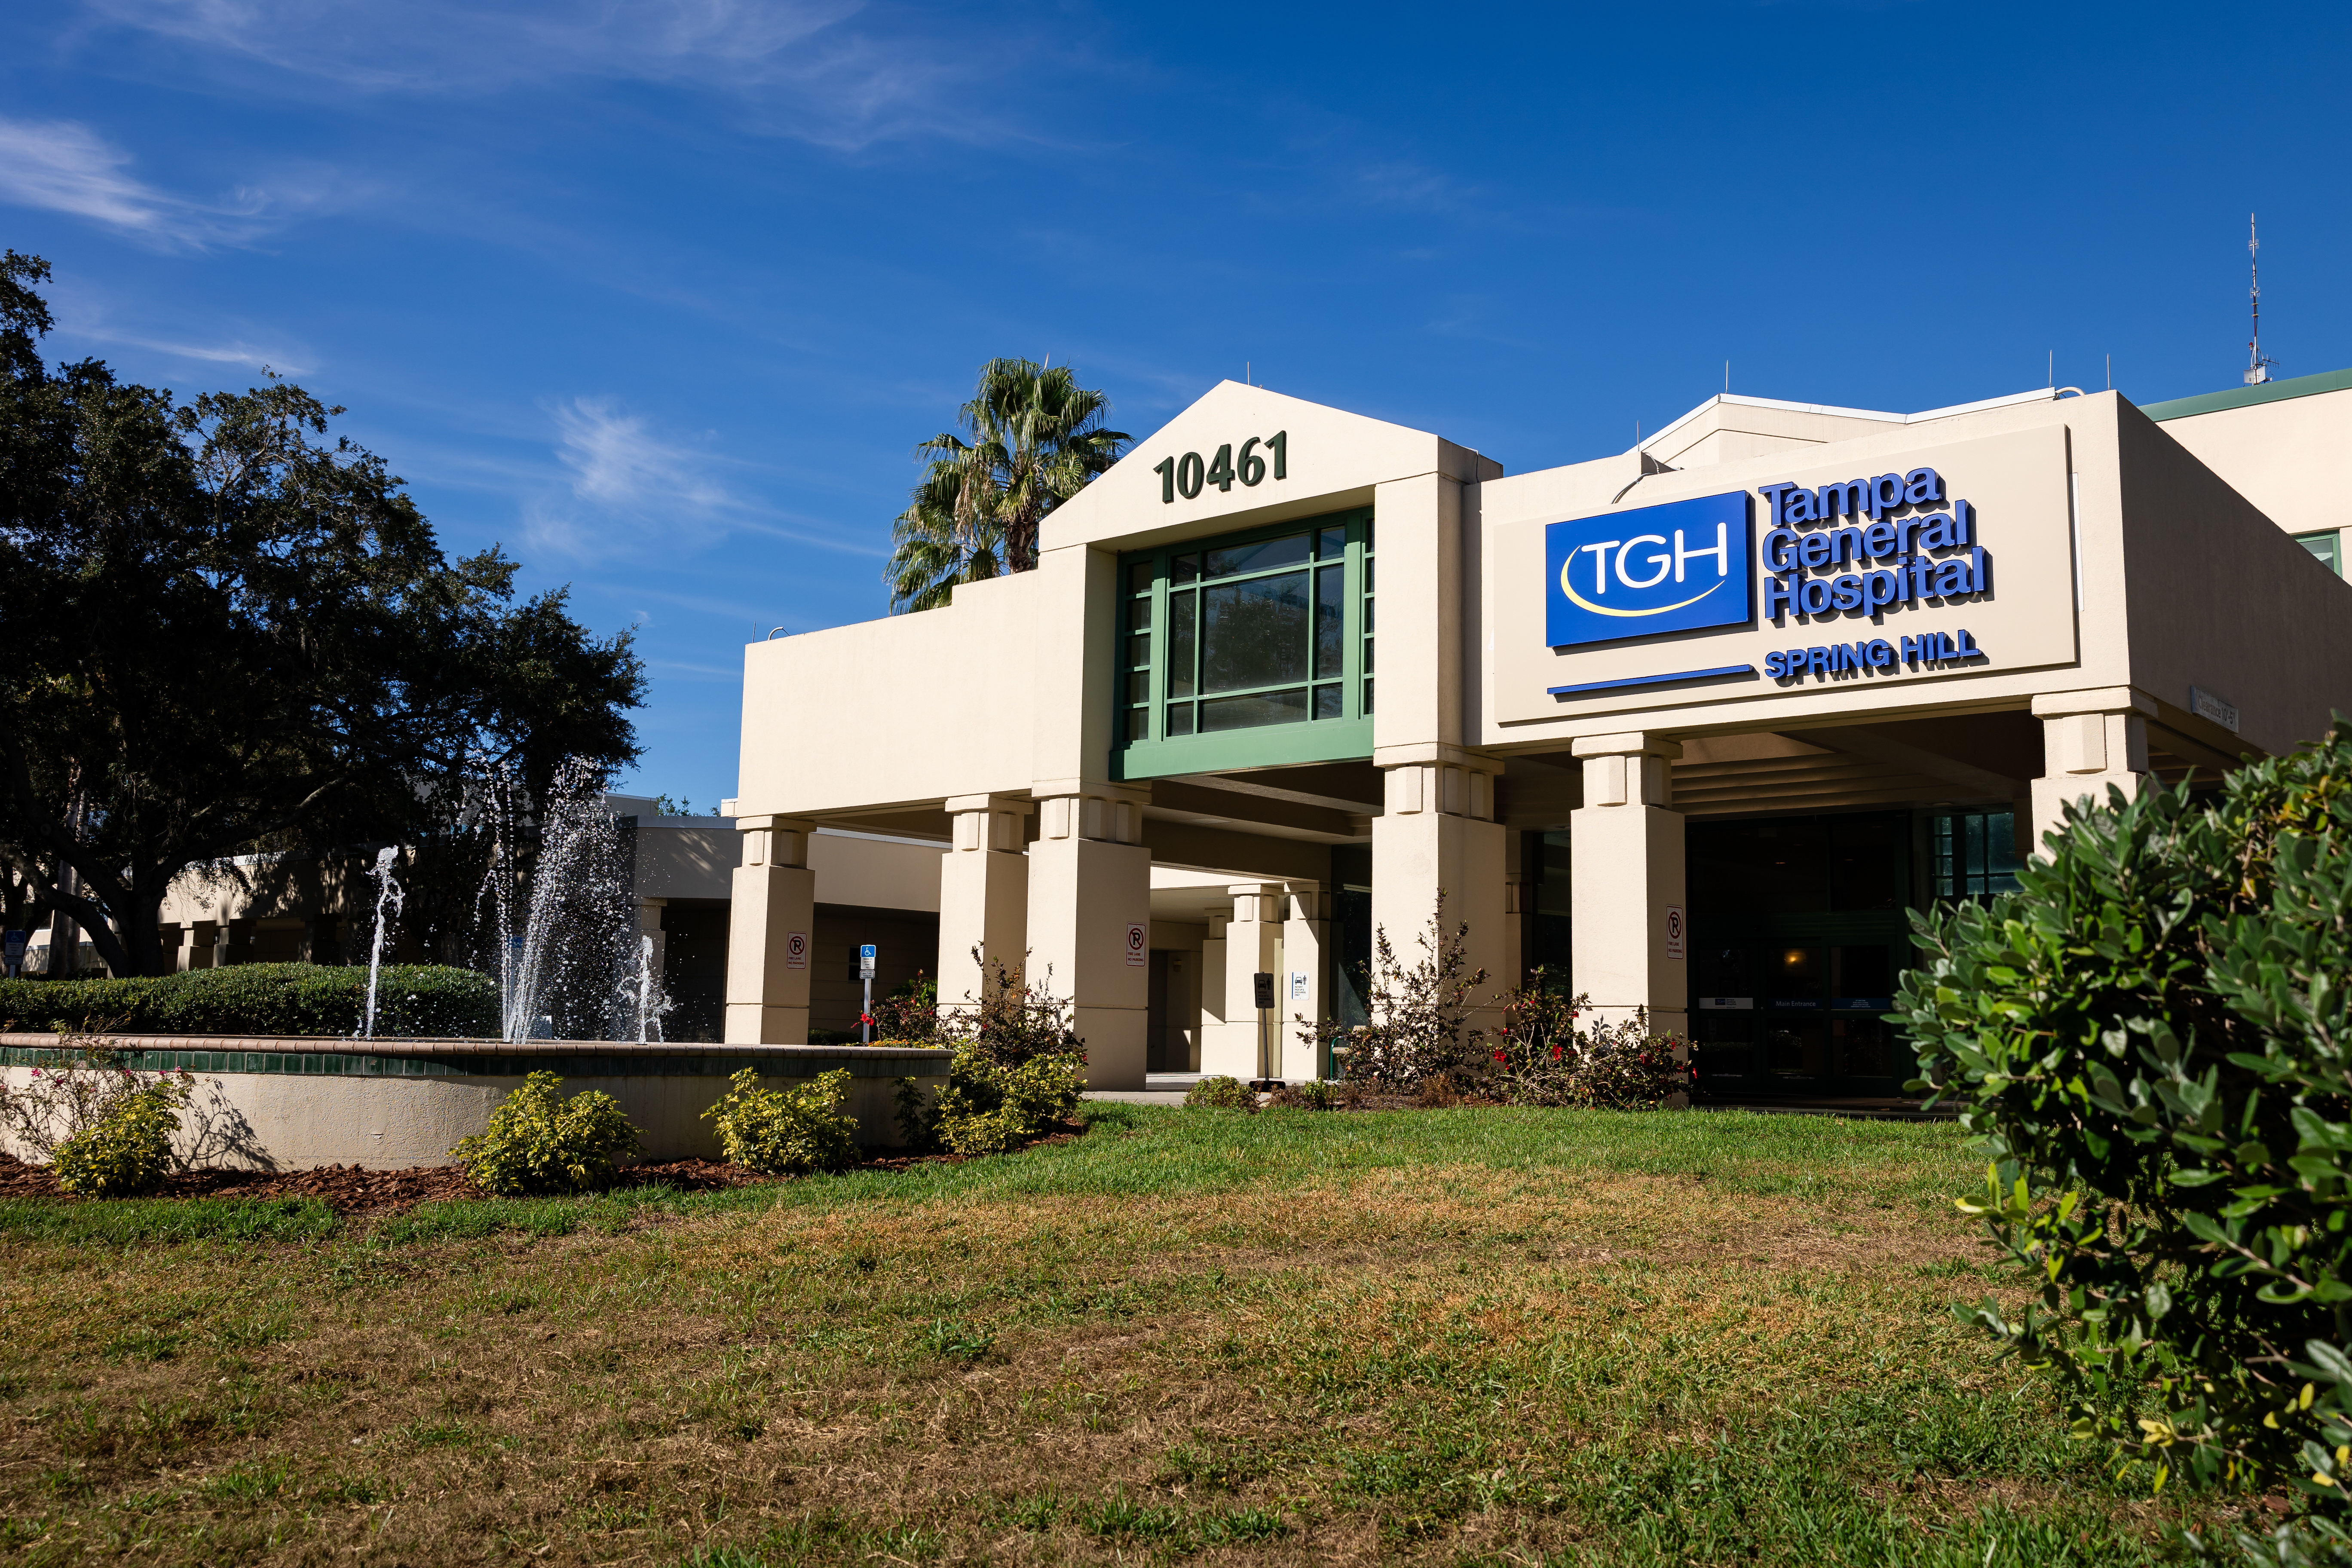 tampa general hospital spring hill exterior with sign